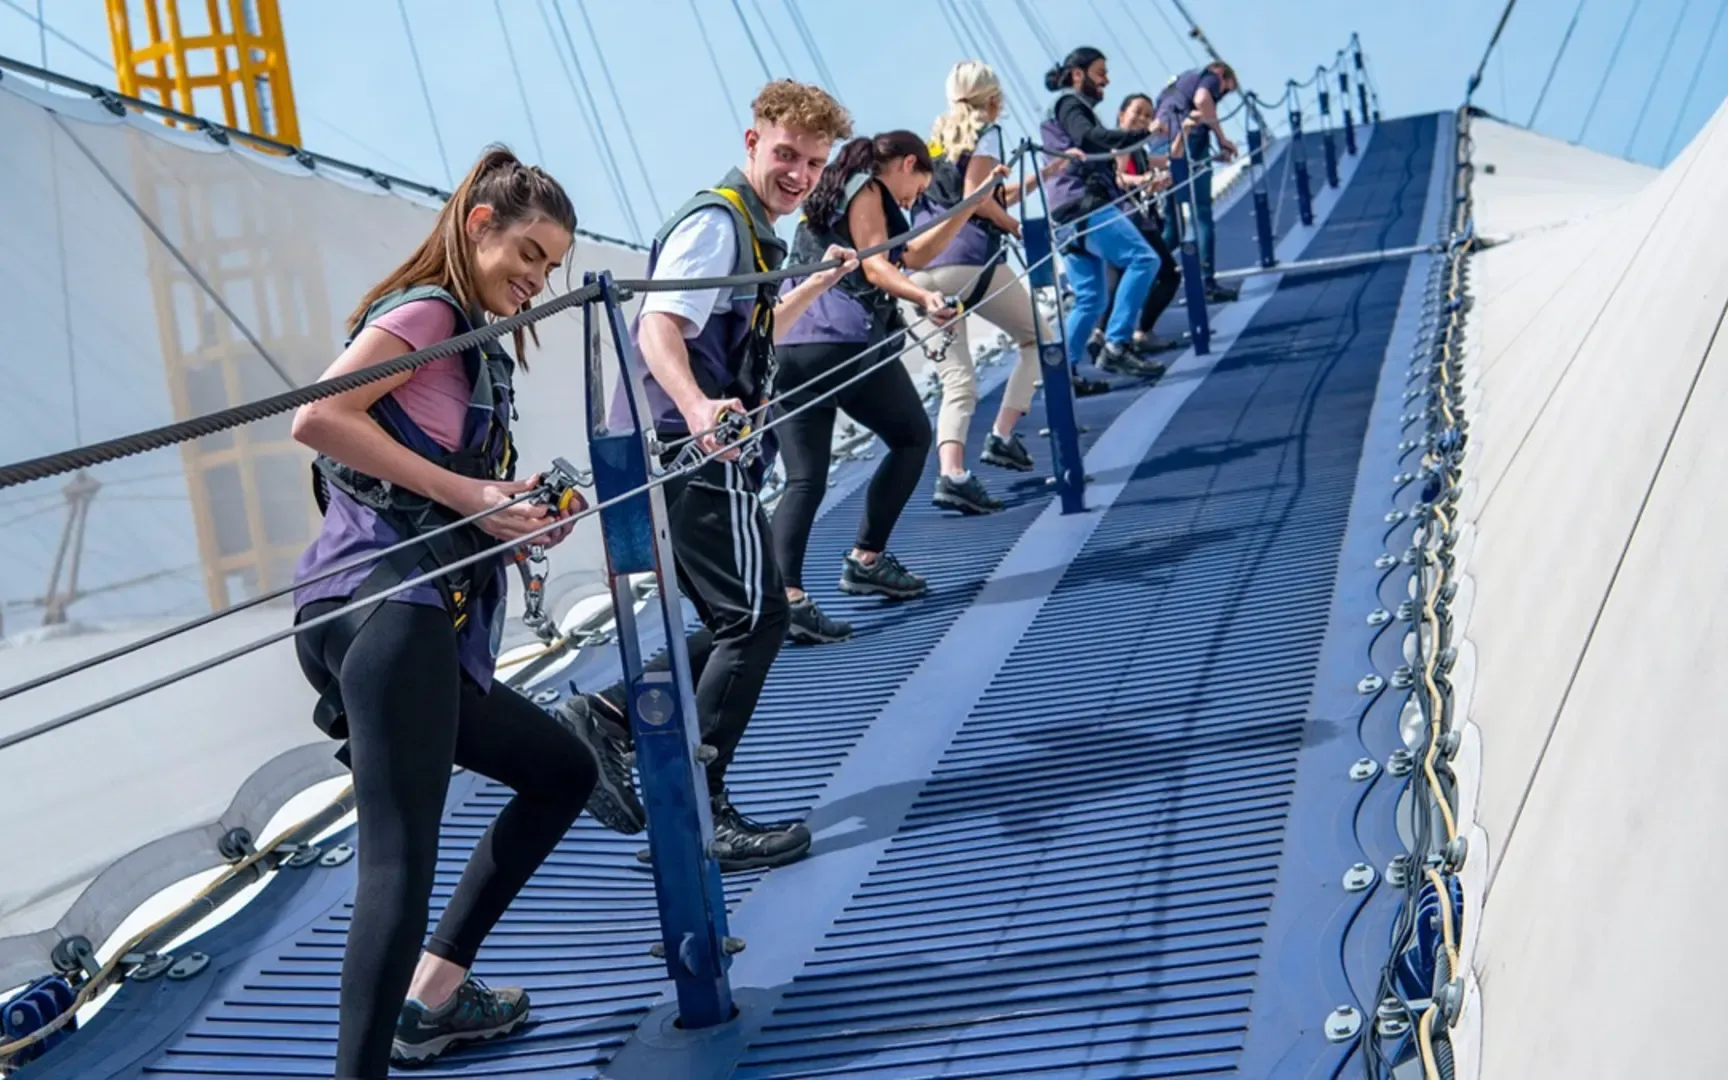 An image showing people climbing the O2 in London